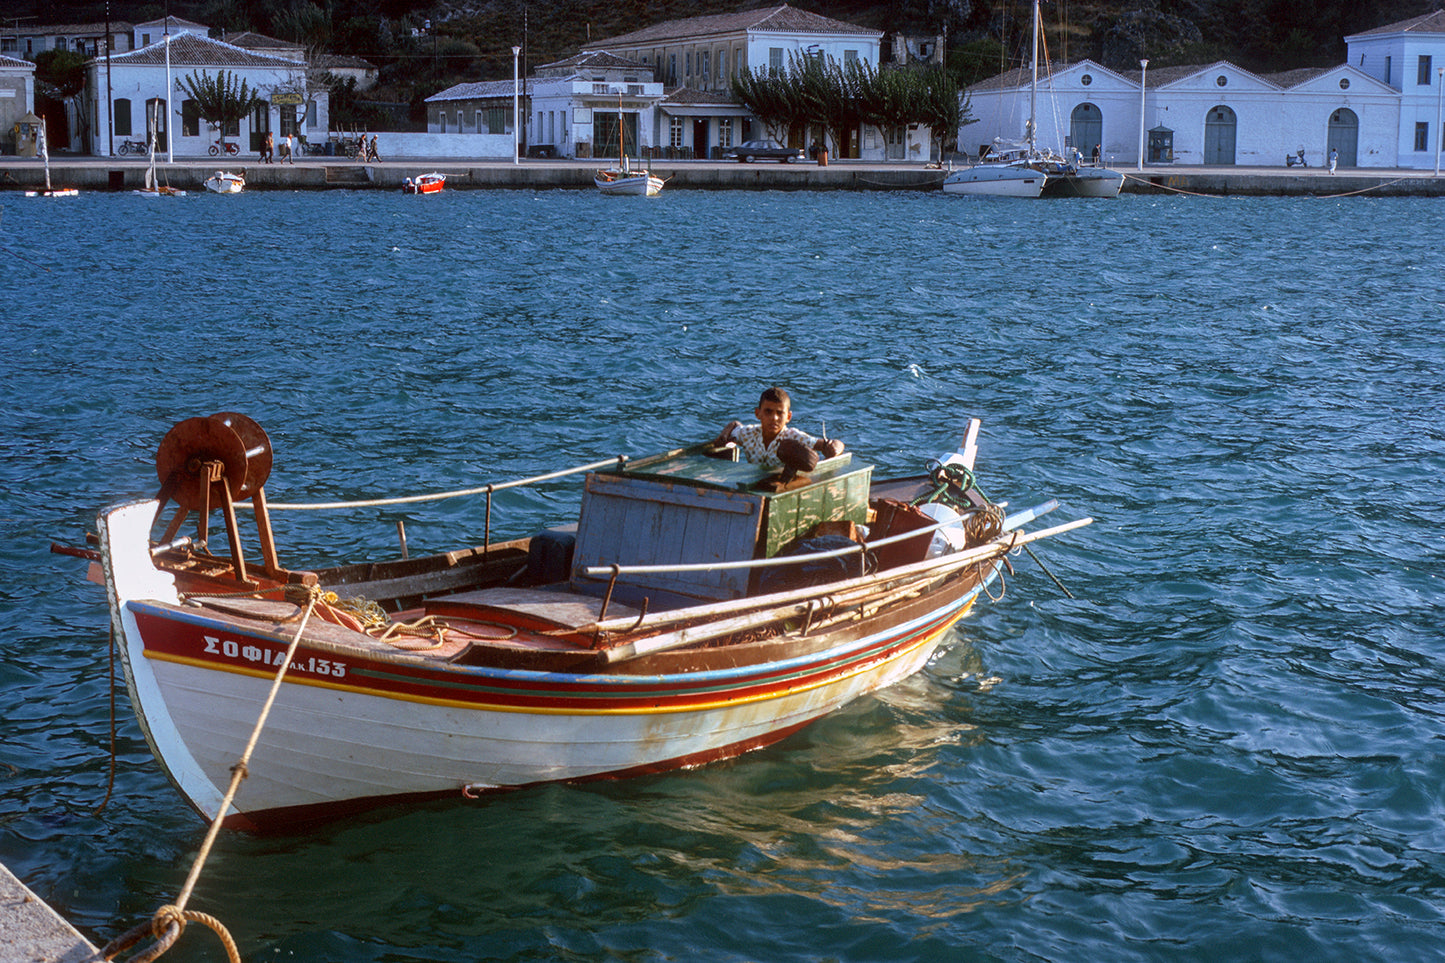 Samos, a small ishing boat in the port of Karlovasi